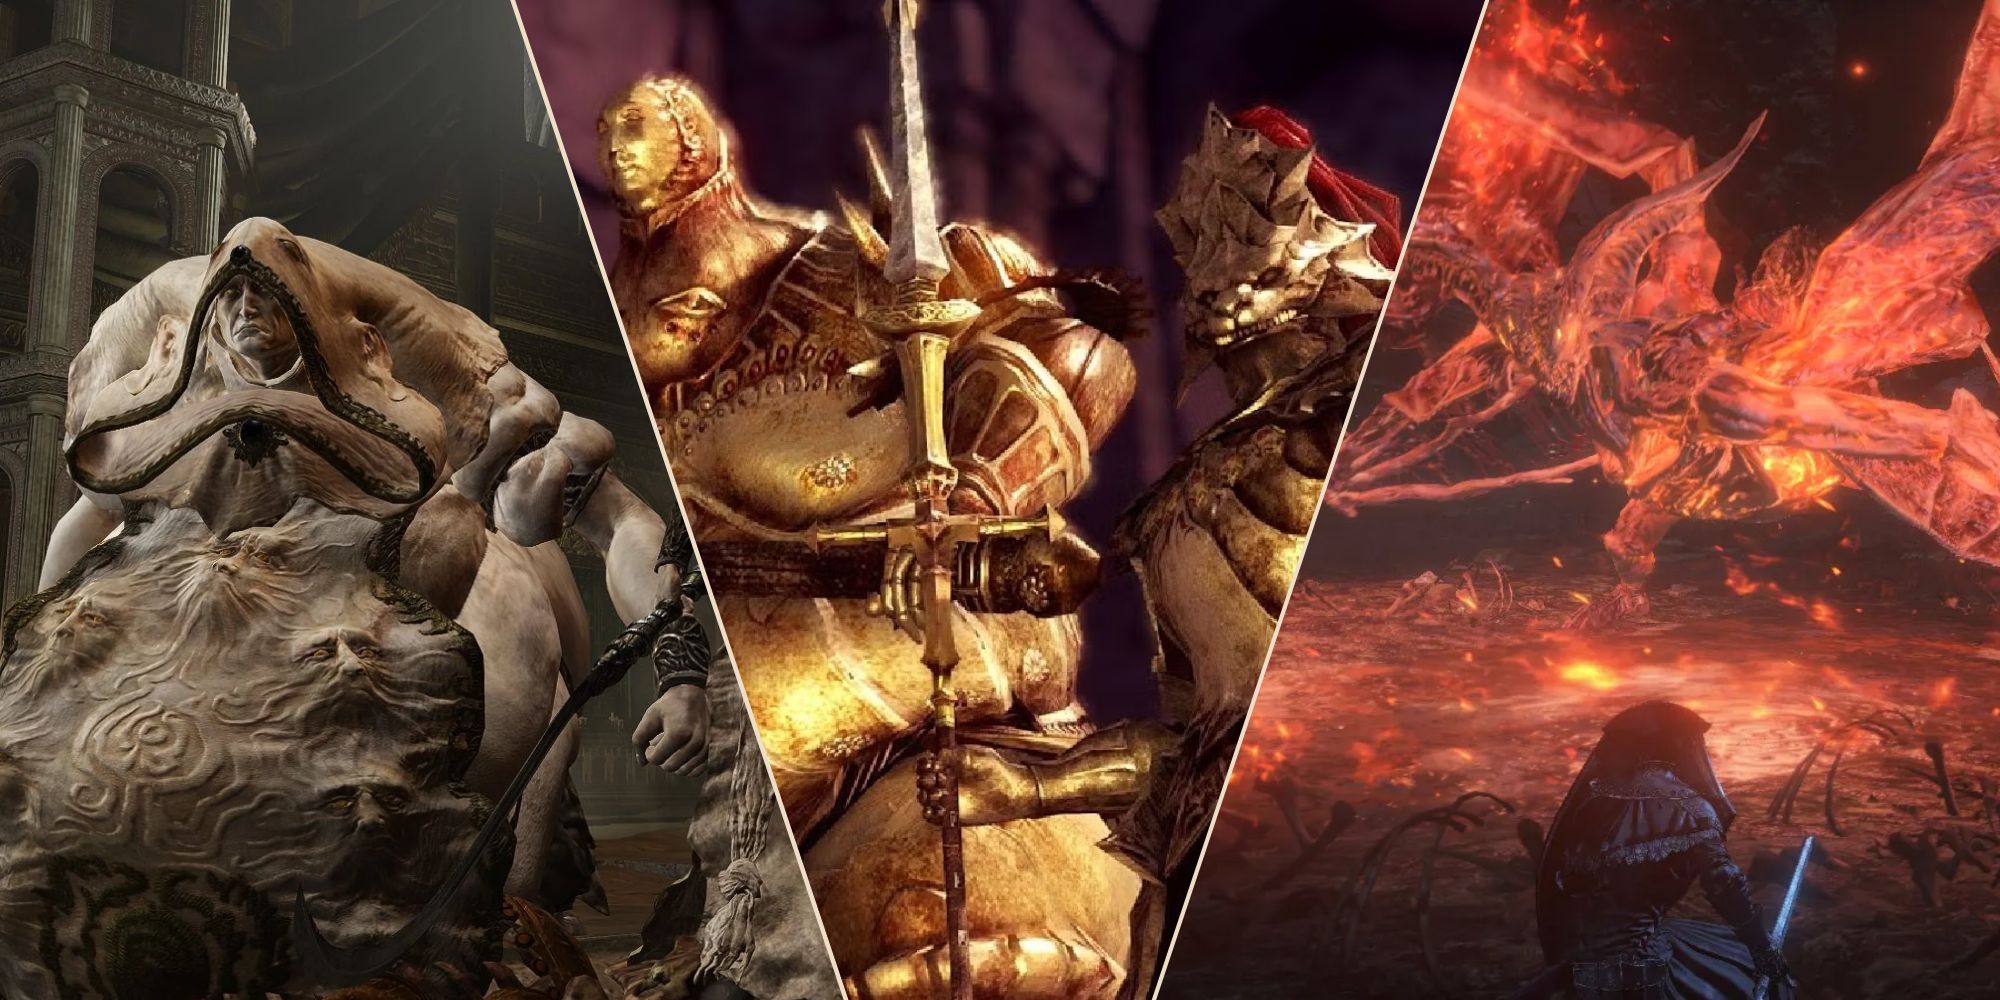 FromSoftware Bosses Split Image Godskin Duo, Ornstein and Smough, and the Demon Prince